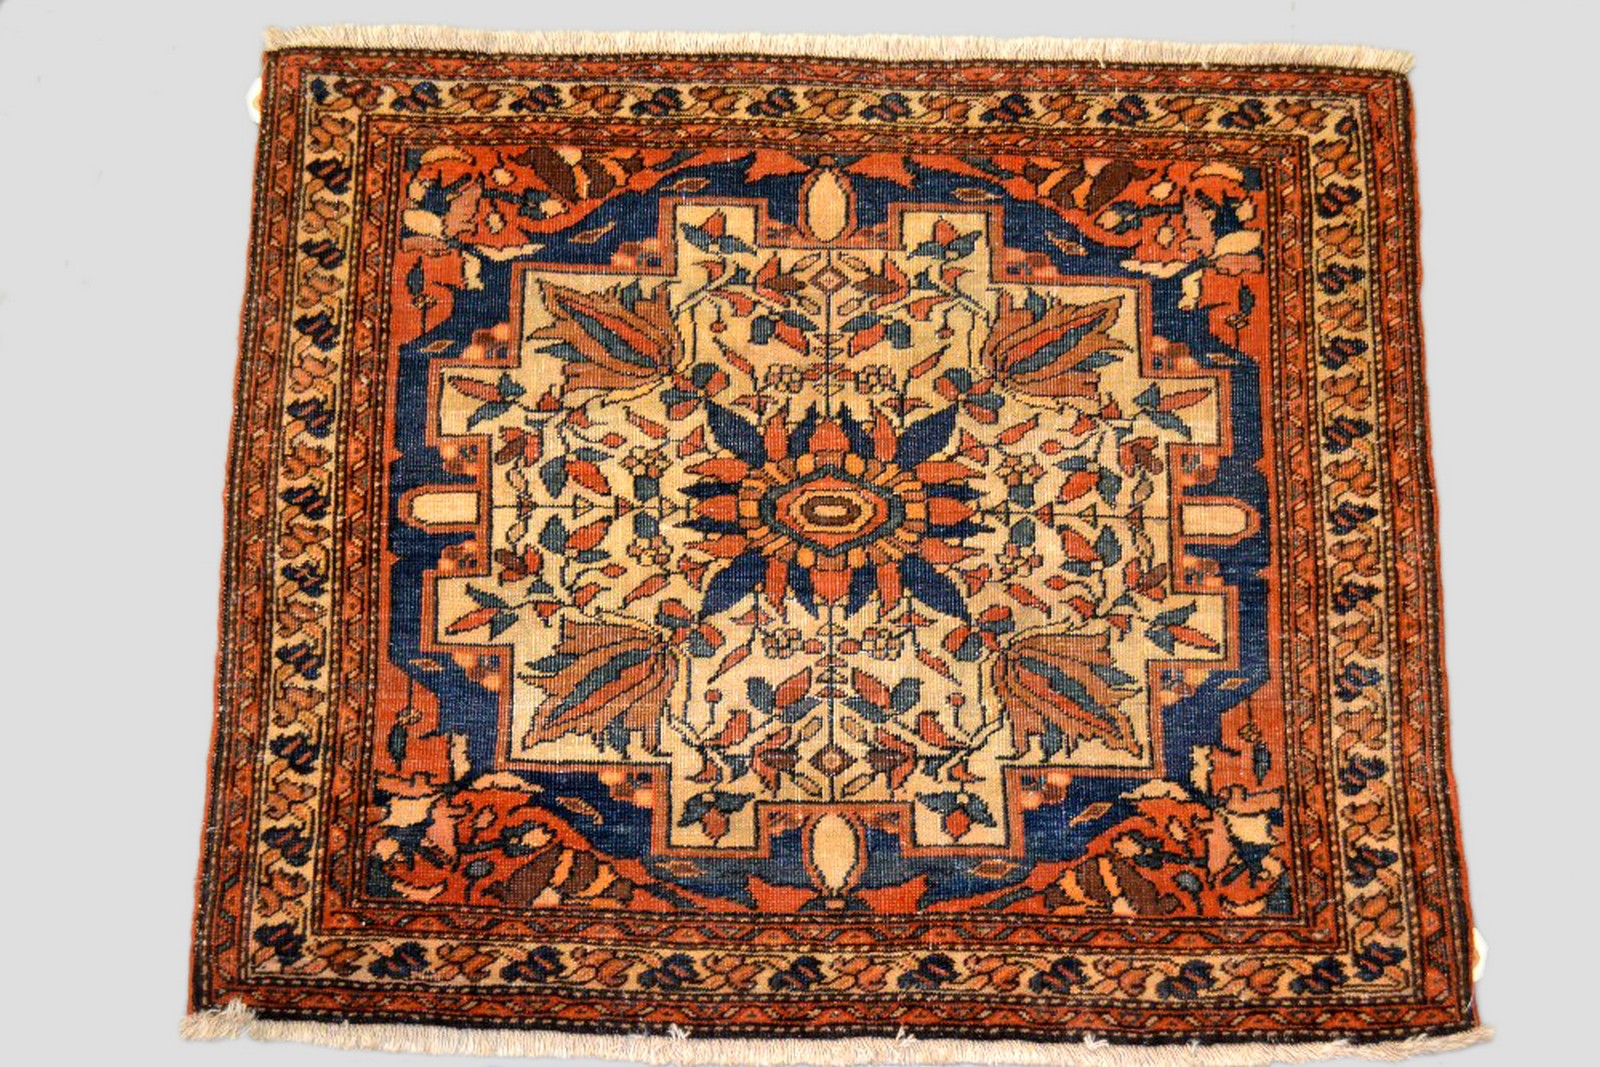 Saruk mat, Feraghan area, north west Persia, early 20th century, 2ft. x 2ft. 5in. 0.61m. x 0.74m.